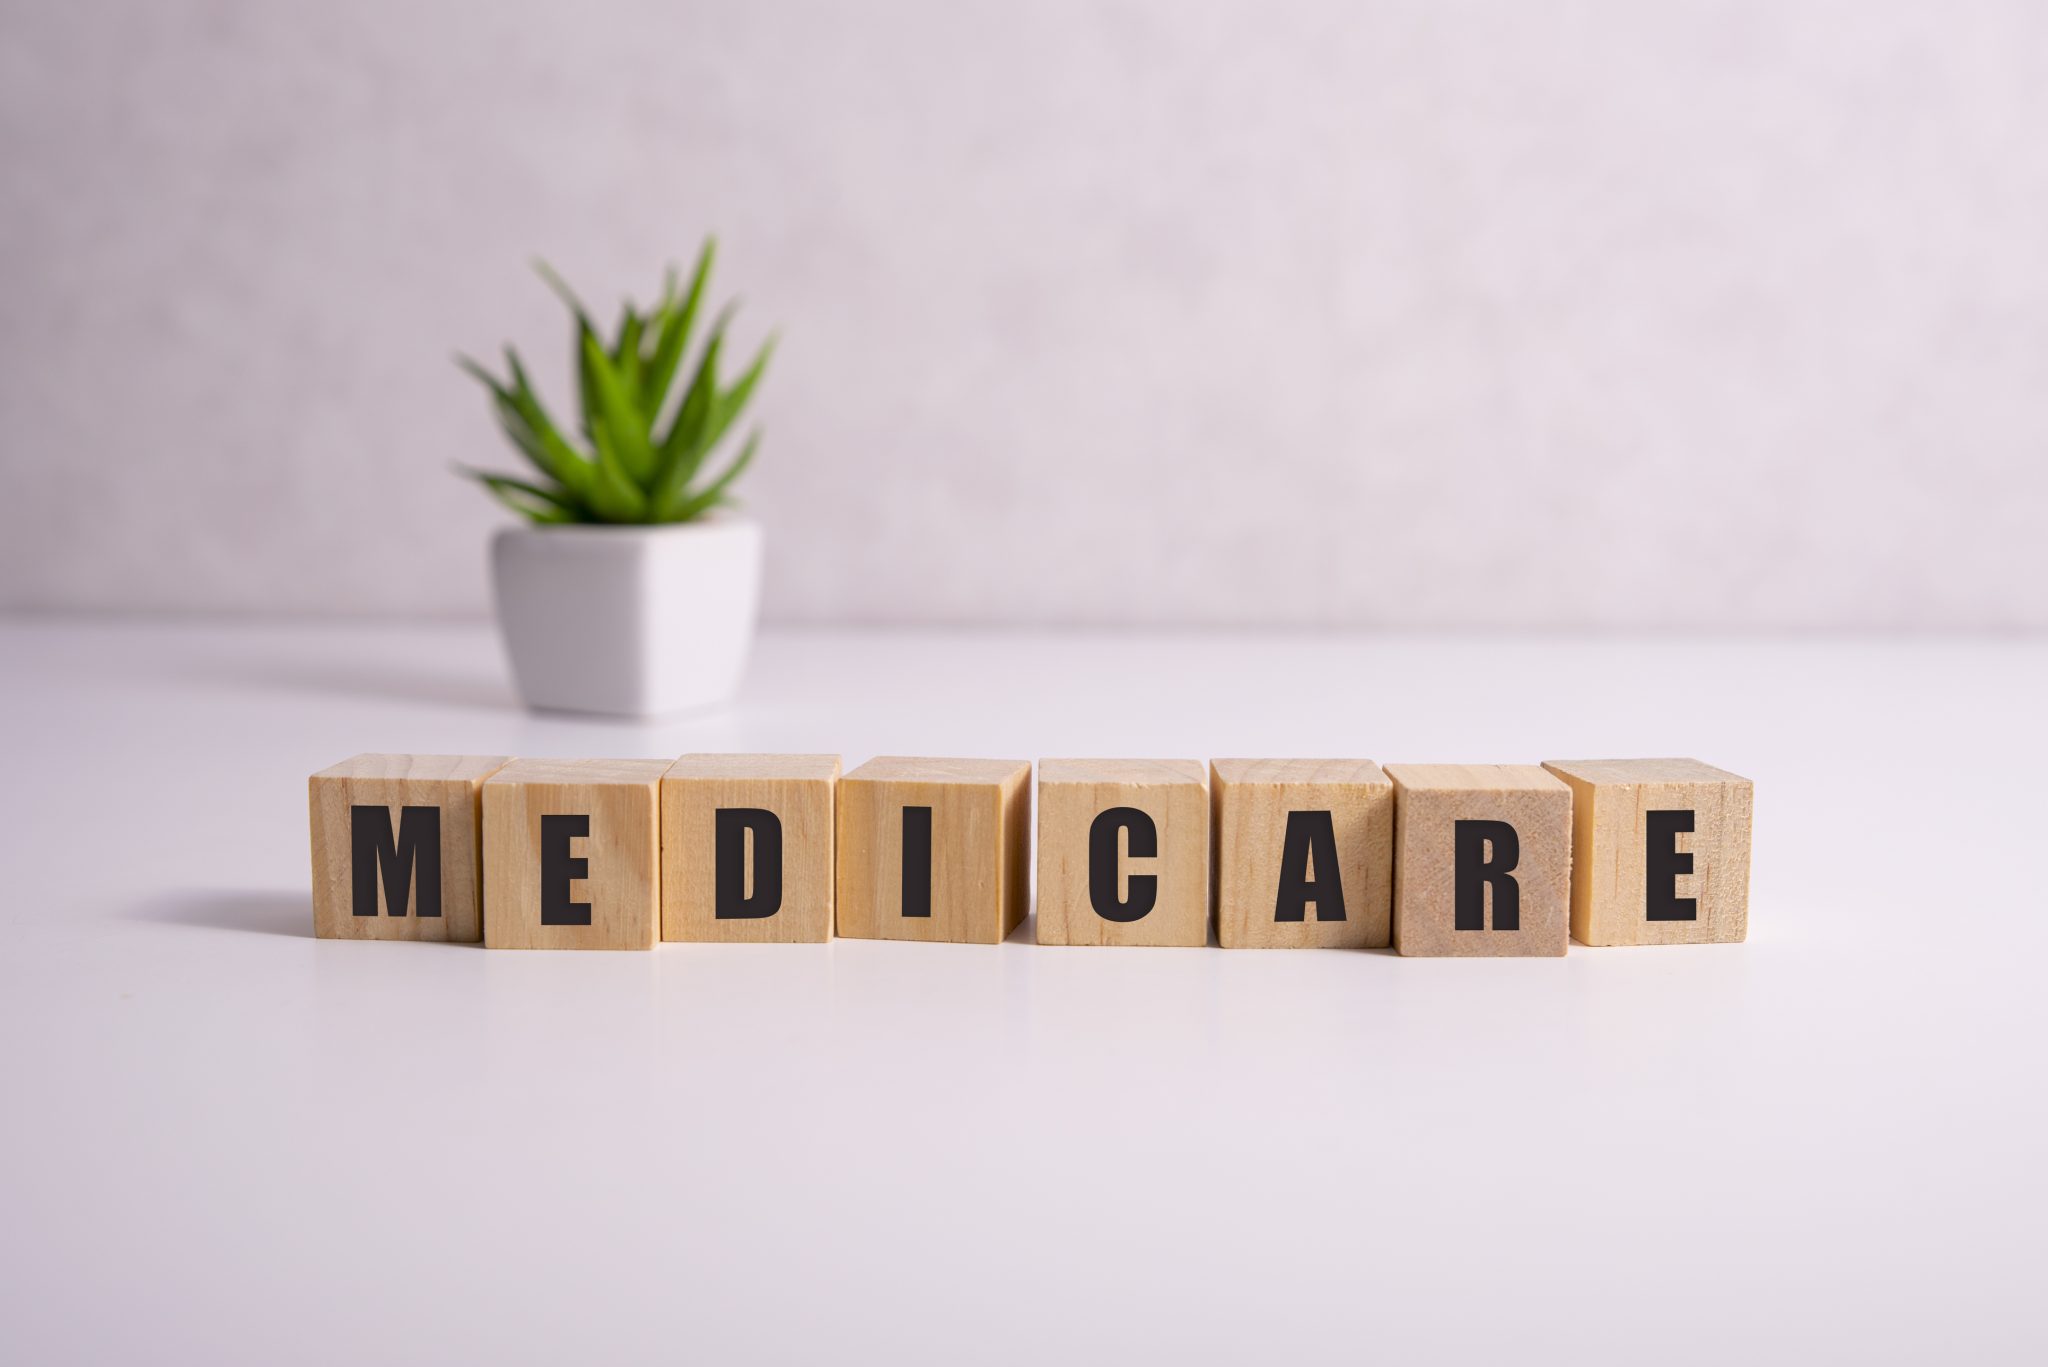 MEDICARE word made with building blocks, medical concept background.